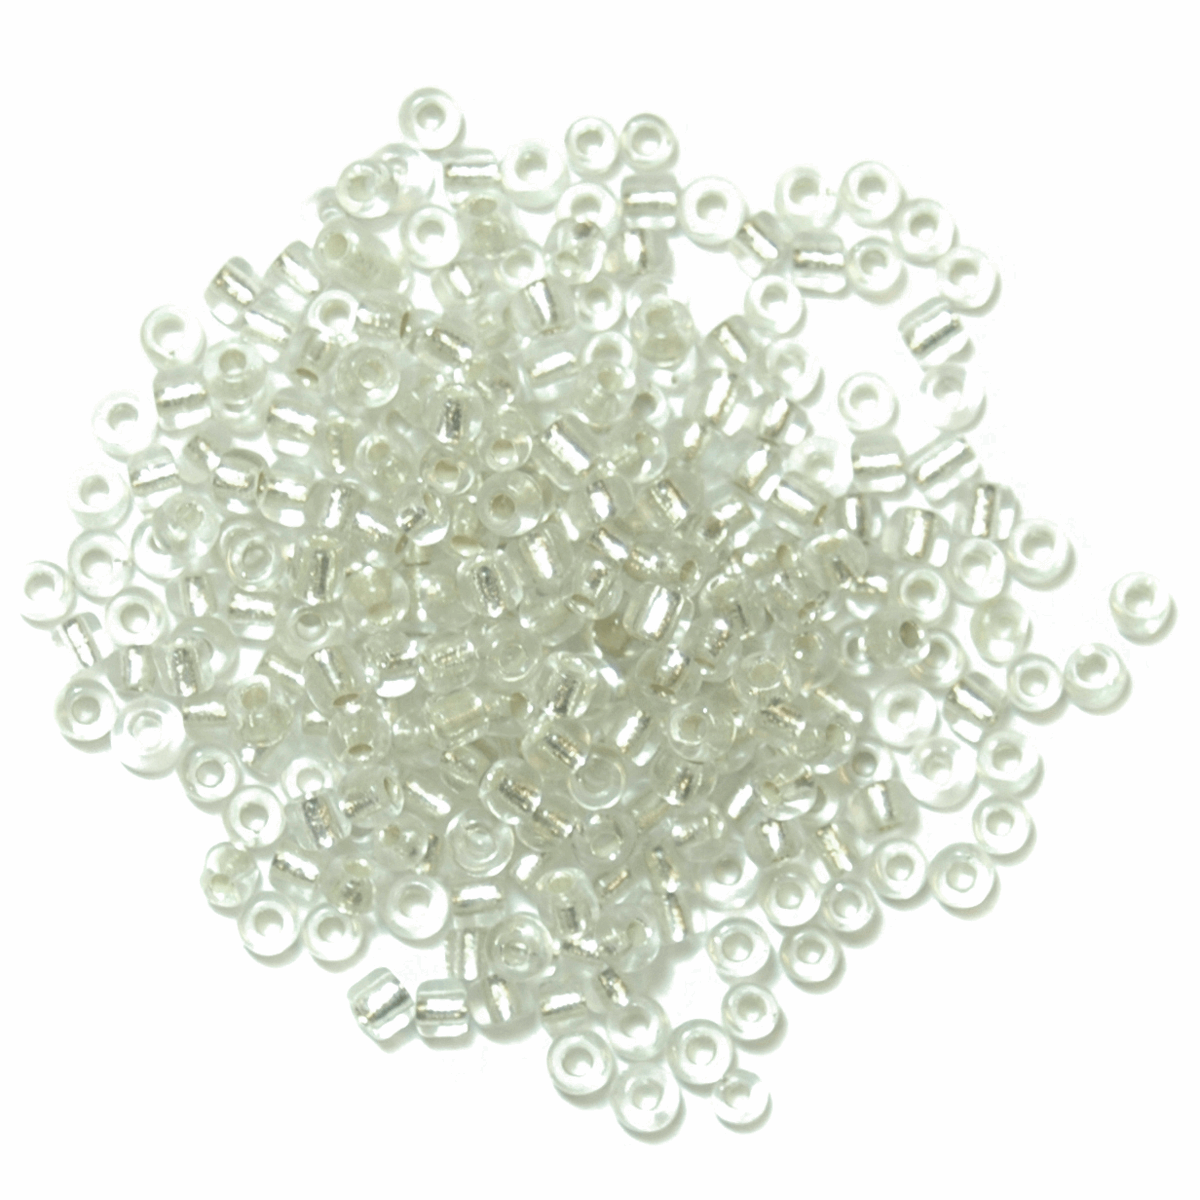 Trimits Silver Seed Beads - 8g Pack